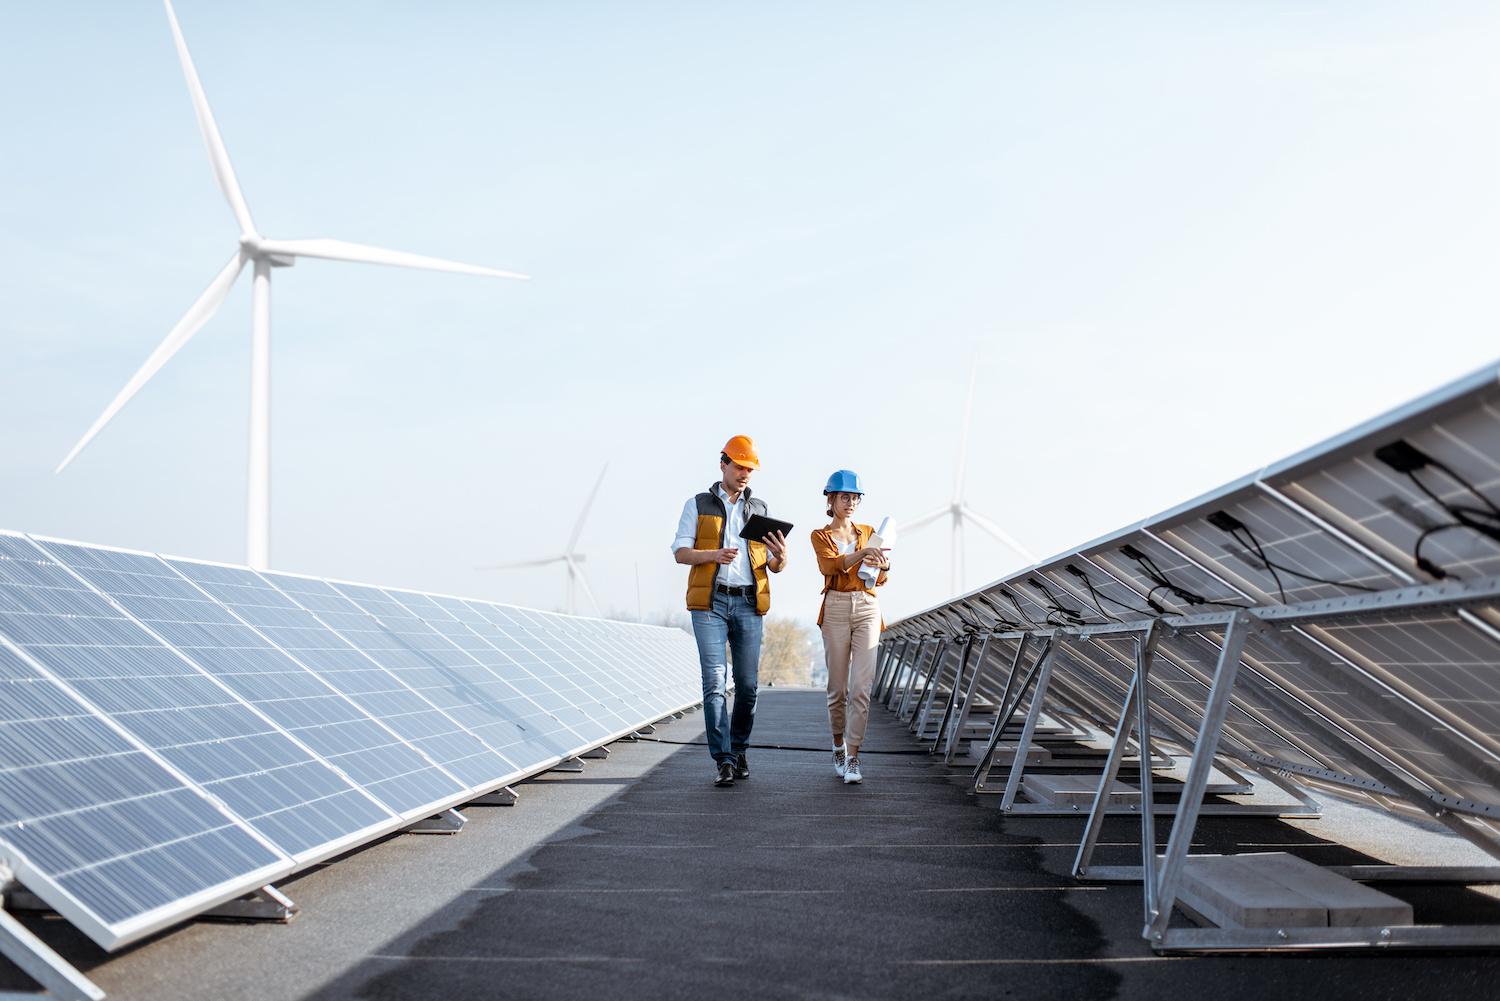 Workers walking through a solar power plant with wind turbines in the background – Achieving the SDGs with renewable energy